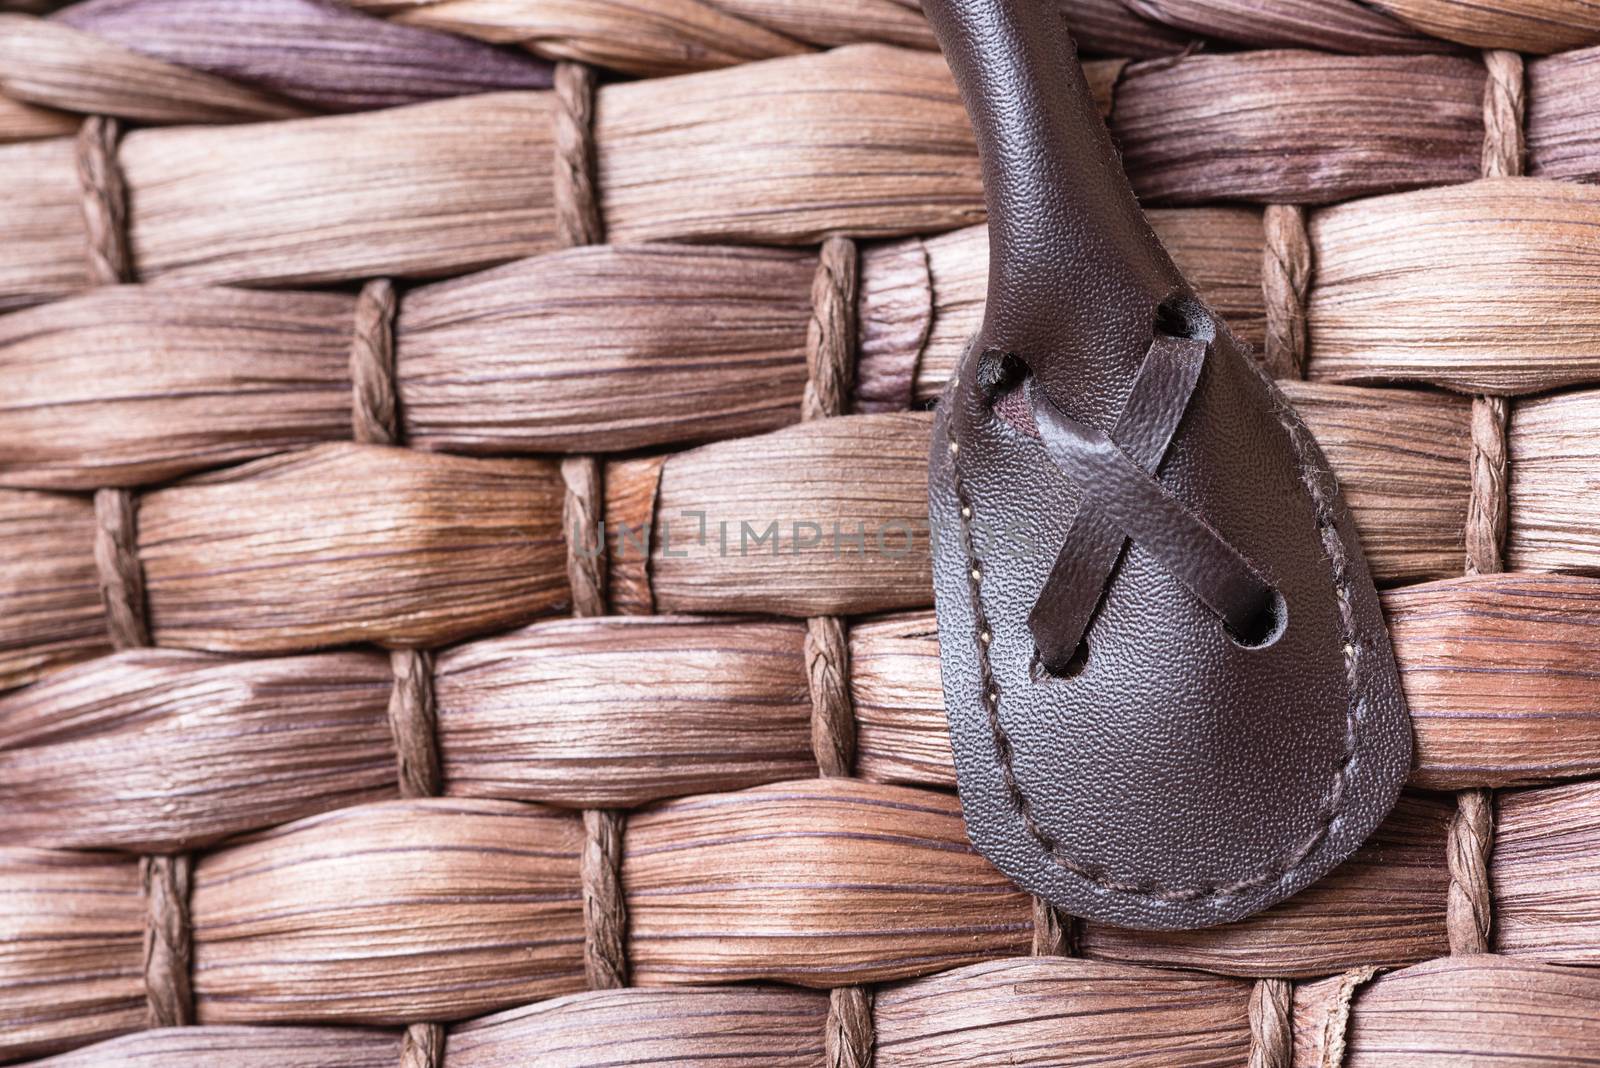 A macro shot of a leather handle stitched into a brown wovel wicker basket.